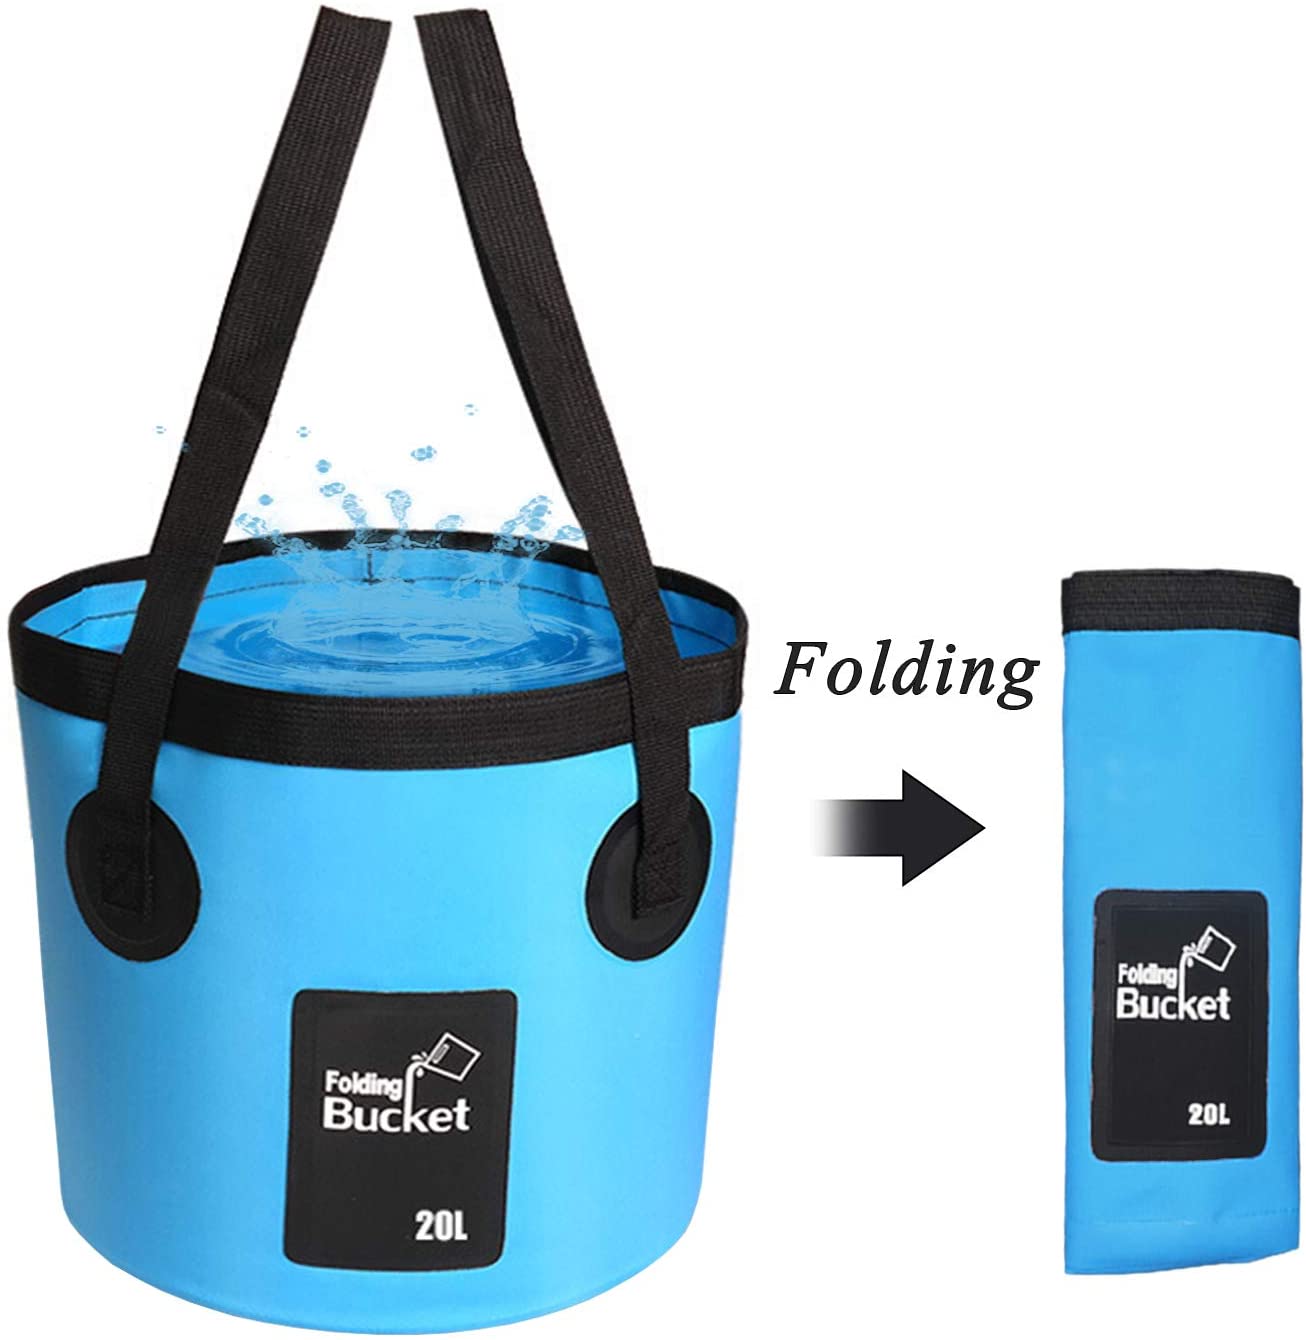 AutoM Folding Bucket,Portable Collapsible Bucket Water Carrier Storage Wash Bin 20L for Camping Hiking Fishing Travel